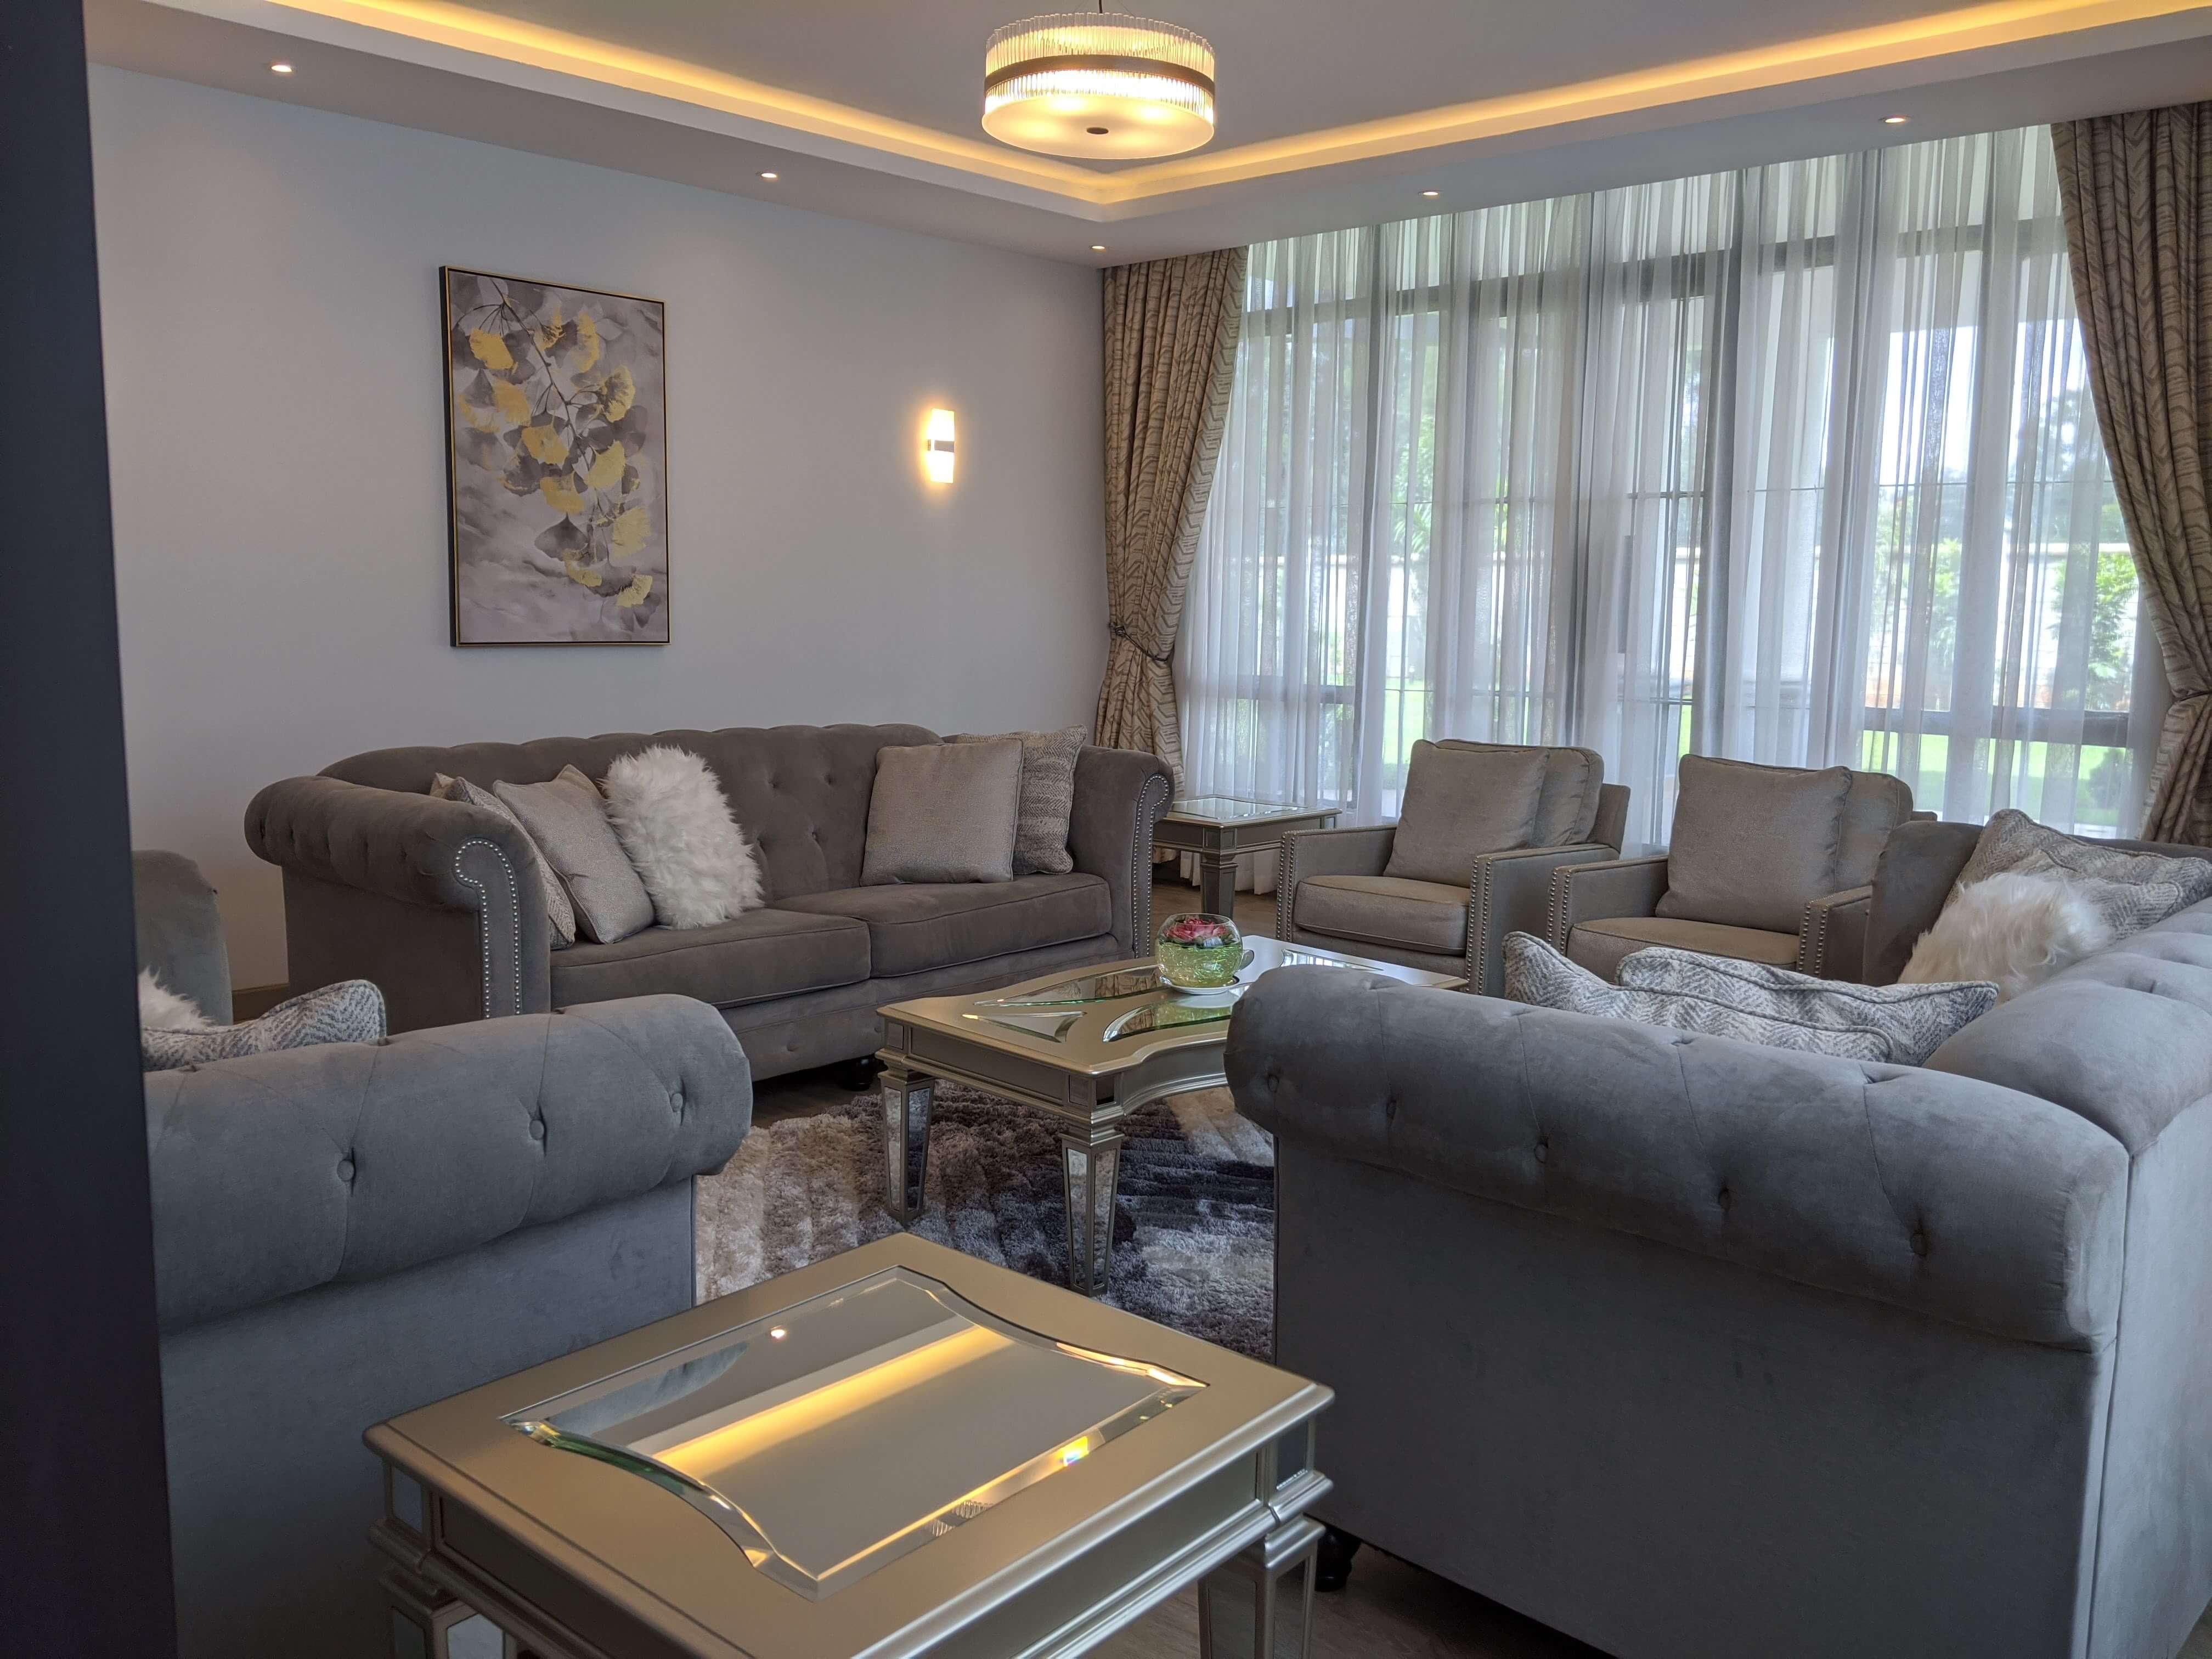 How To Decorate A Small Living Room In Kenya | www.cintronbeveragegroup.com